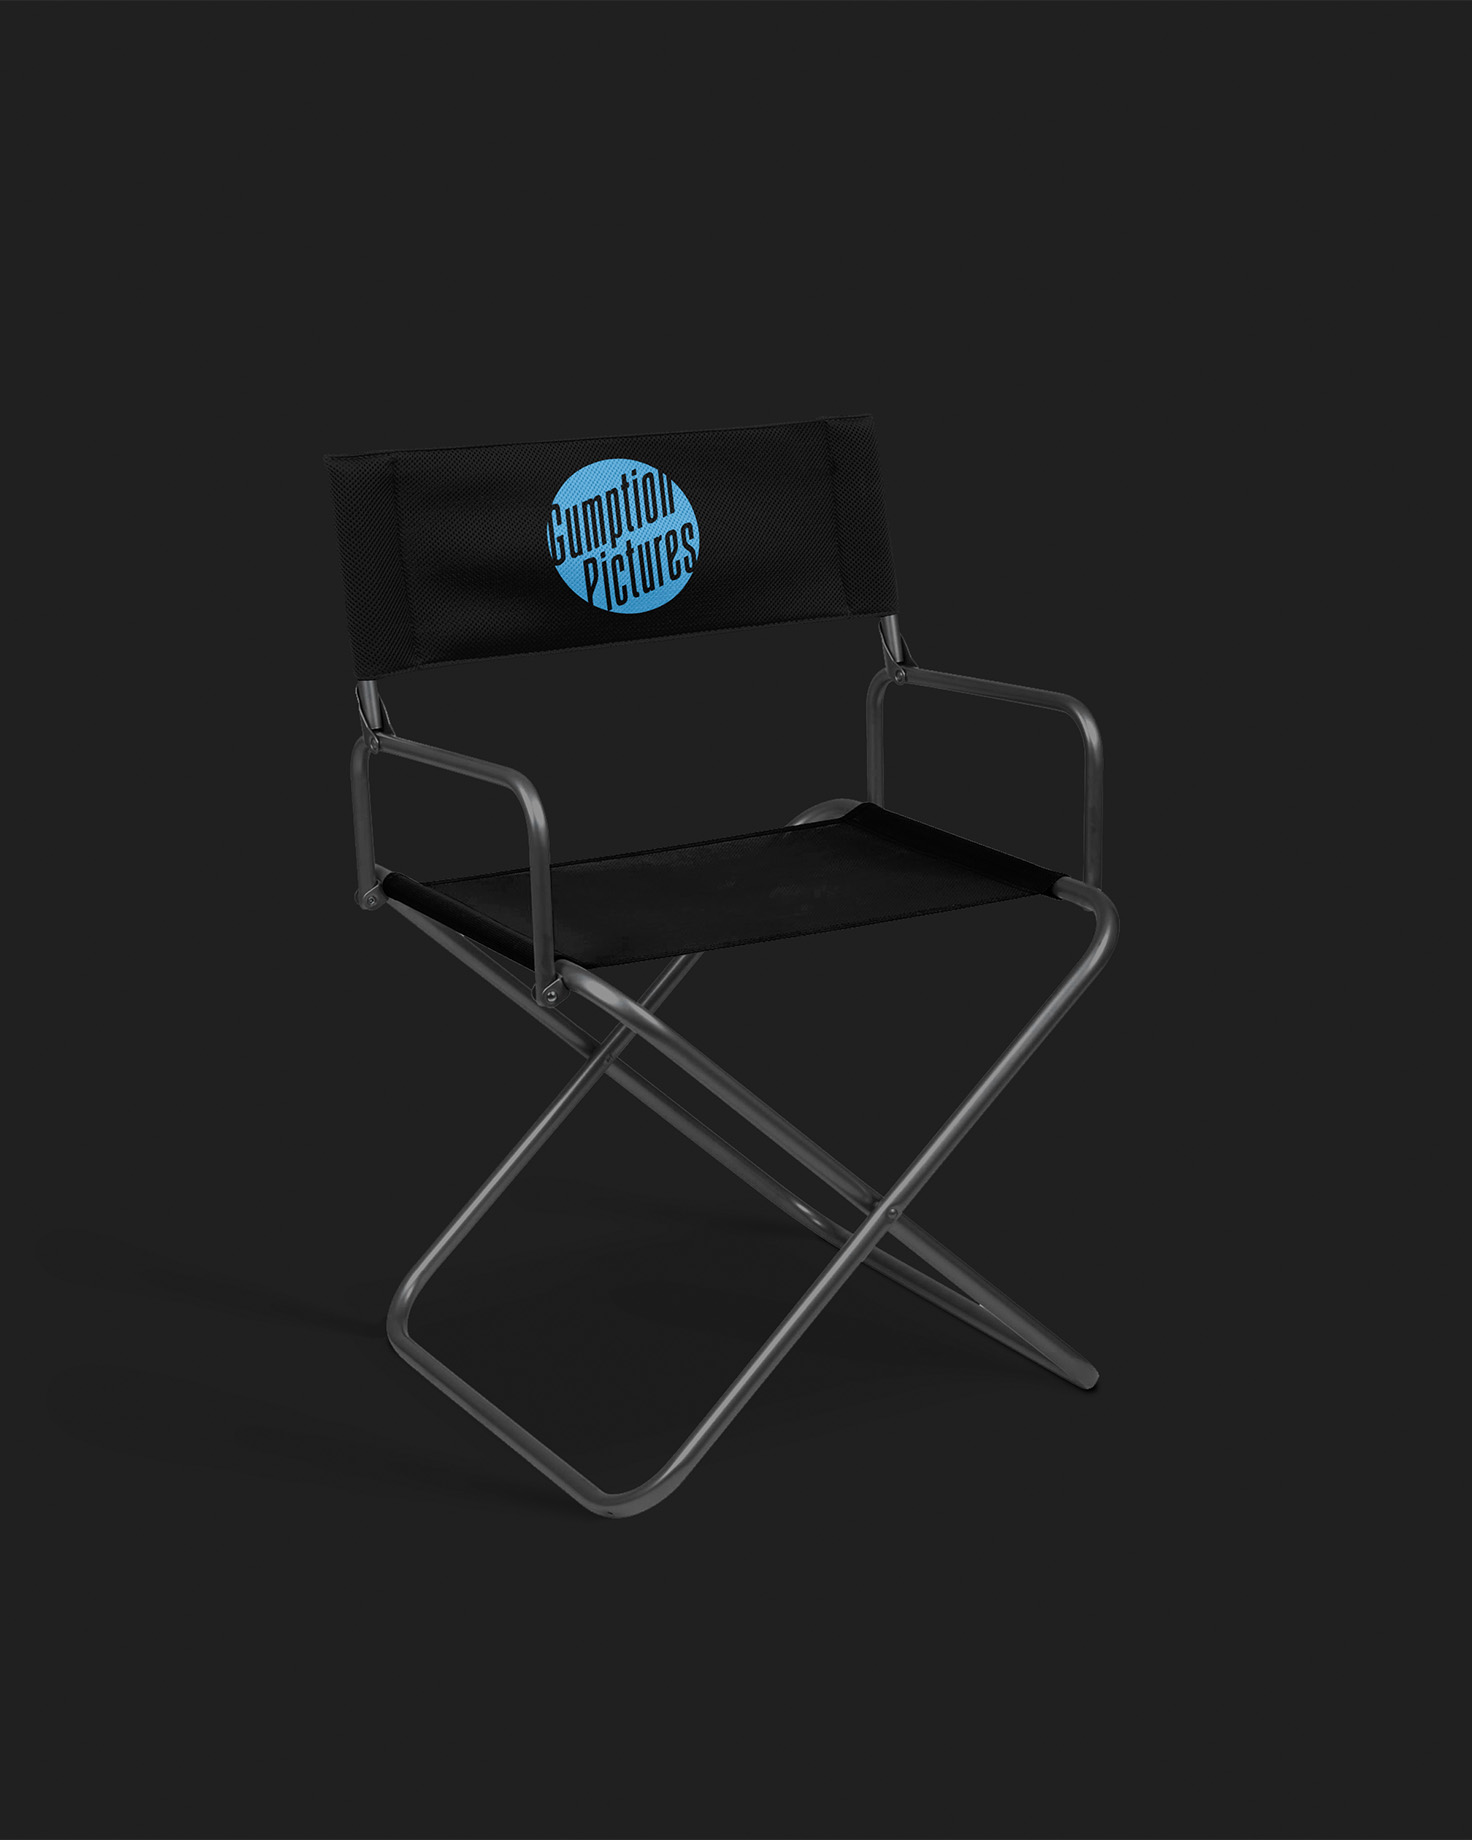 Brand logo on director's chair - Gumption Pictures - Whiskey and Red Small Business Branding and Website Design Packages